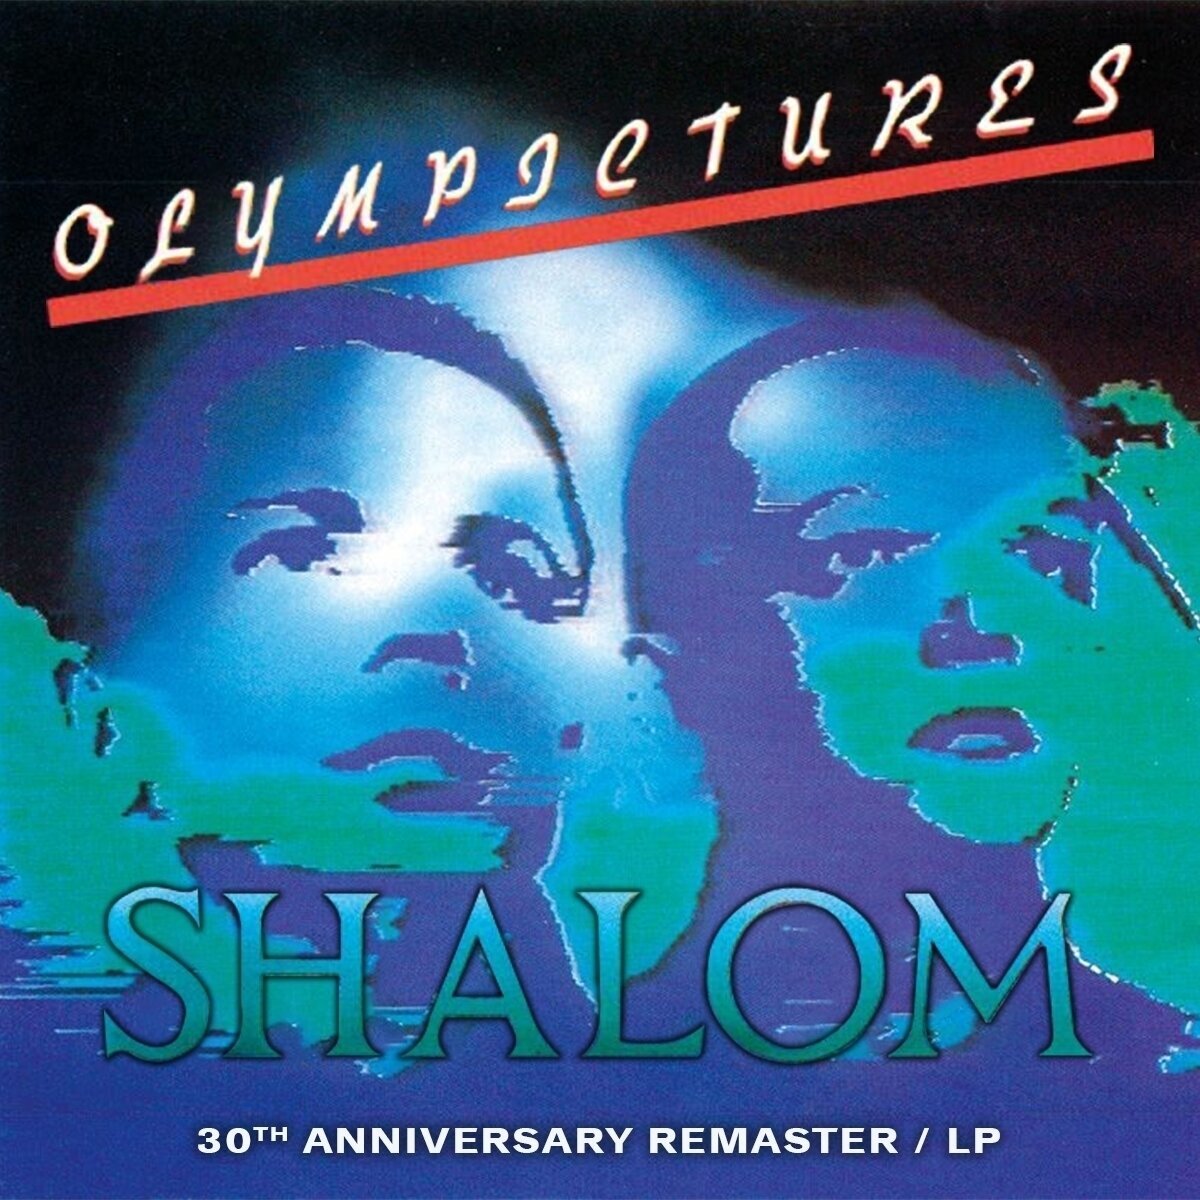 CD musique Shalom - Olympictures (30th Anniversary) (Remastered) (CD)